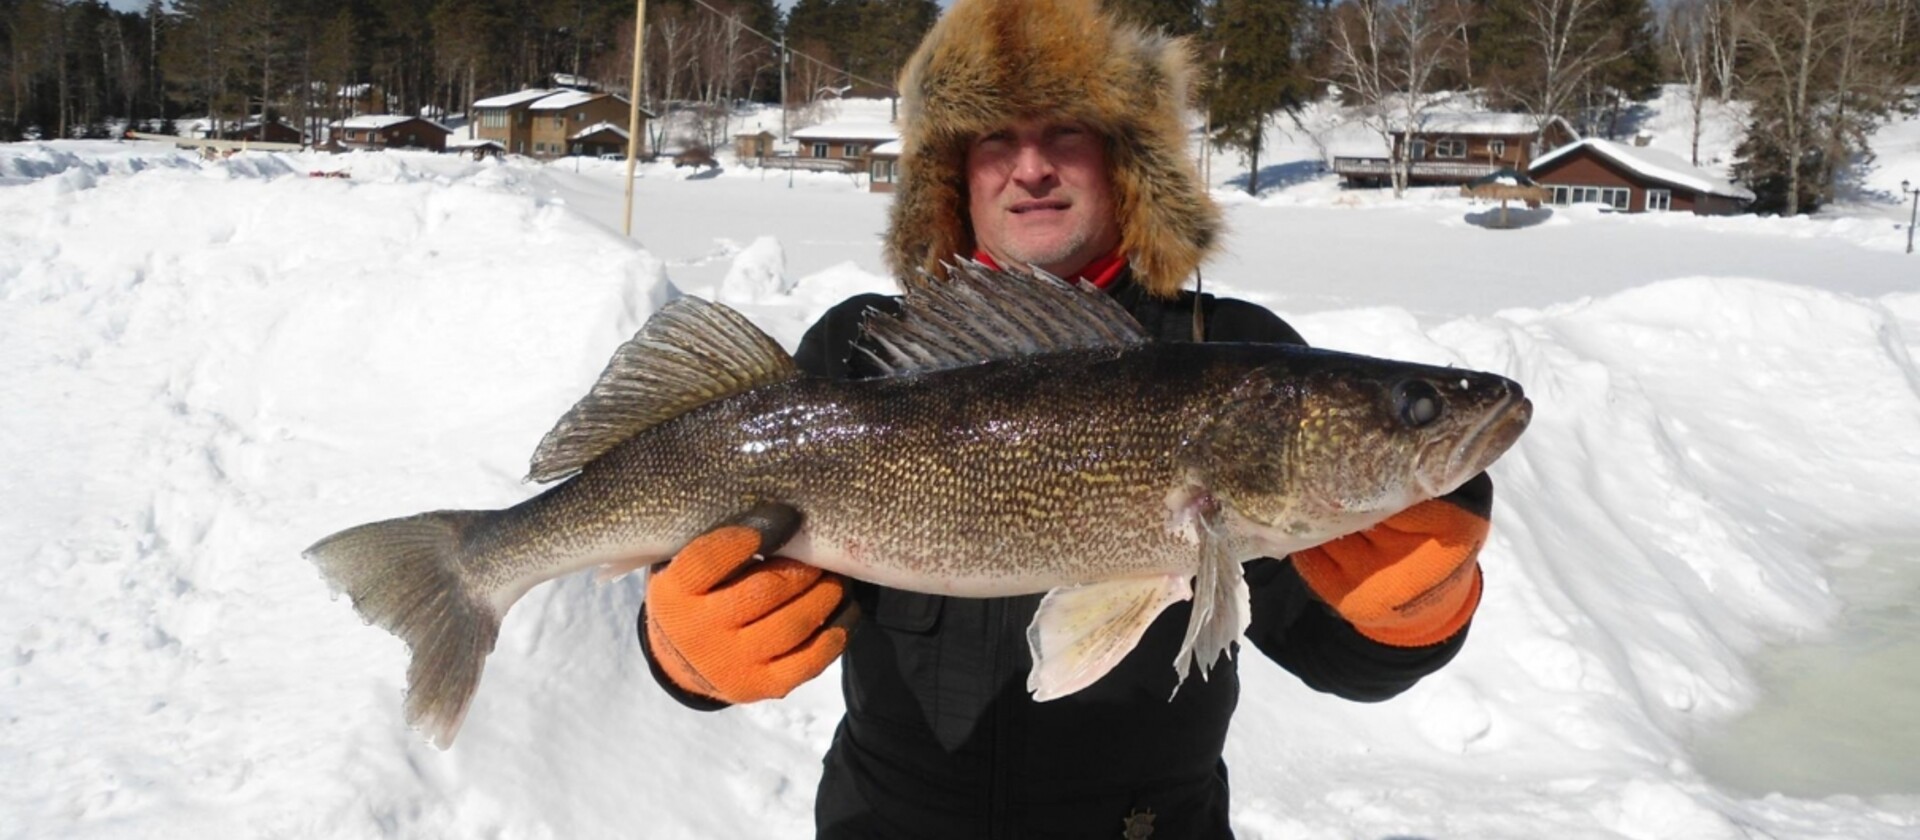 It's time to gear up and make new ice fishing memories